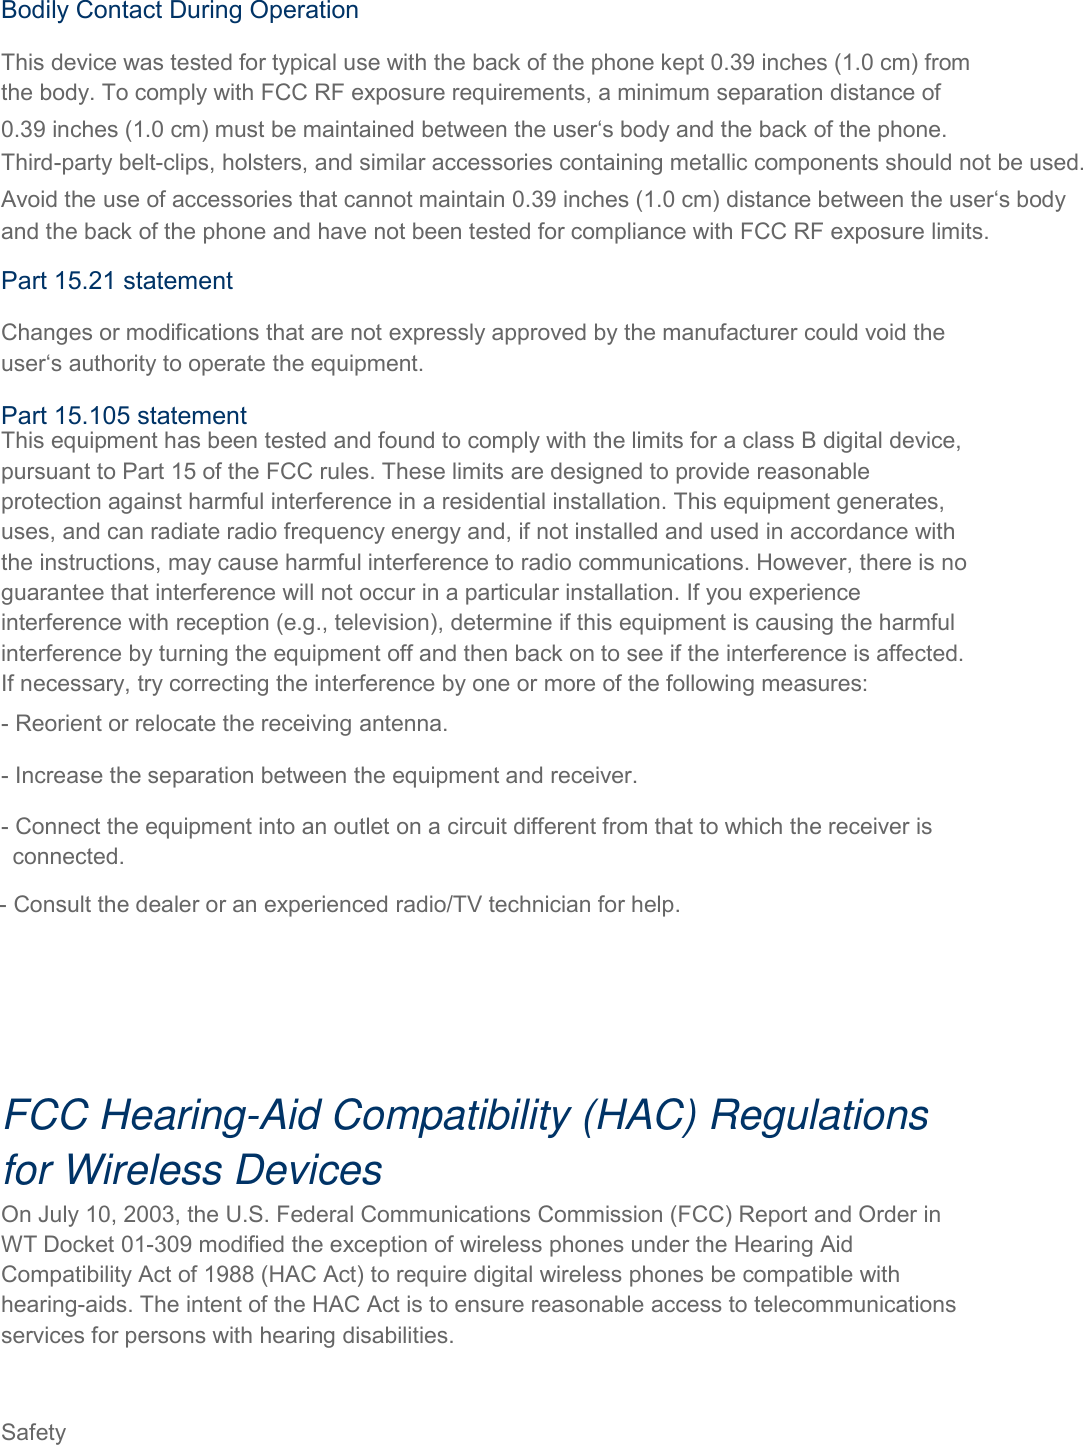  Safety   FCC Hearing-Aid Compatibility (HAC) Regulations for Wireless Devices On July 10, 2003, the U.S. Federal Communications Commission (FCC) Report and Order in WT Docket 01-309 modified the exception of wireless phones under the Hearing Aid Compatibility Act of 1988 (HAC Act) to require digital wireless phones be compatible with hearing-aids. The intent of the HAC Act is to ensure reasonable access to telecommunications services for persons with hearing disabilities. Bodily Contact During Operation This device was tested for typical use with the back of the phone kept 0.39 inches (1.0 cm) from the body. To comply with FCC RF exposure requirements, a minimum separation distance of 0.39 inches (1.0 cm) must be maintained between the user‘s body and the back of the phone.Third-party belt-clips, holsters, and similar accessories containing metallic components should not be used. Avoid the use of accessories that cannot maintain 0.39 inches (1.0 cm) distance between the user‘s body and the back of the phone and have not been tested for compliance with FCC RF exposure limits. Part 15.21 statement Changes or modifications that are not expressly approved by the manufacturer could void the user‘s authority to operate the equipment. Part 15.105 statement This equipment has been tested and found to comply with the limits for a class B digital device, pursuant to Part 15 of the FCC rules. These limits are designed to provide reasonable protection against harmful interference in a residential installation. This equipment generates, uses, and can radiate radio frequency energy and, if not installed and used in accordance with the instructions, may cause harmful interference to radio communications. However, there is no guarantee that interference will not occur in a particular installation. If you experience interference with reception (e.g., television), determine if this equipment is causing the harmful interference by turning the equipment off and then back on to see if the interference is affected. If necessary, try correcting the interference by one or more of the following measures: - Reorient or relocate the receiving antenna. - Increase the separation between the equipment and receiver. - Connect the equipment into an outlet on a circuit different from that to which the receiver is  connected. - Consult the dealer or an experienced radio/TV technician for help. 